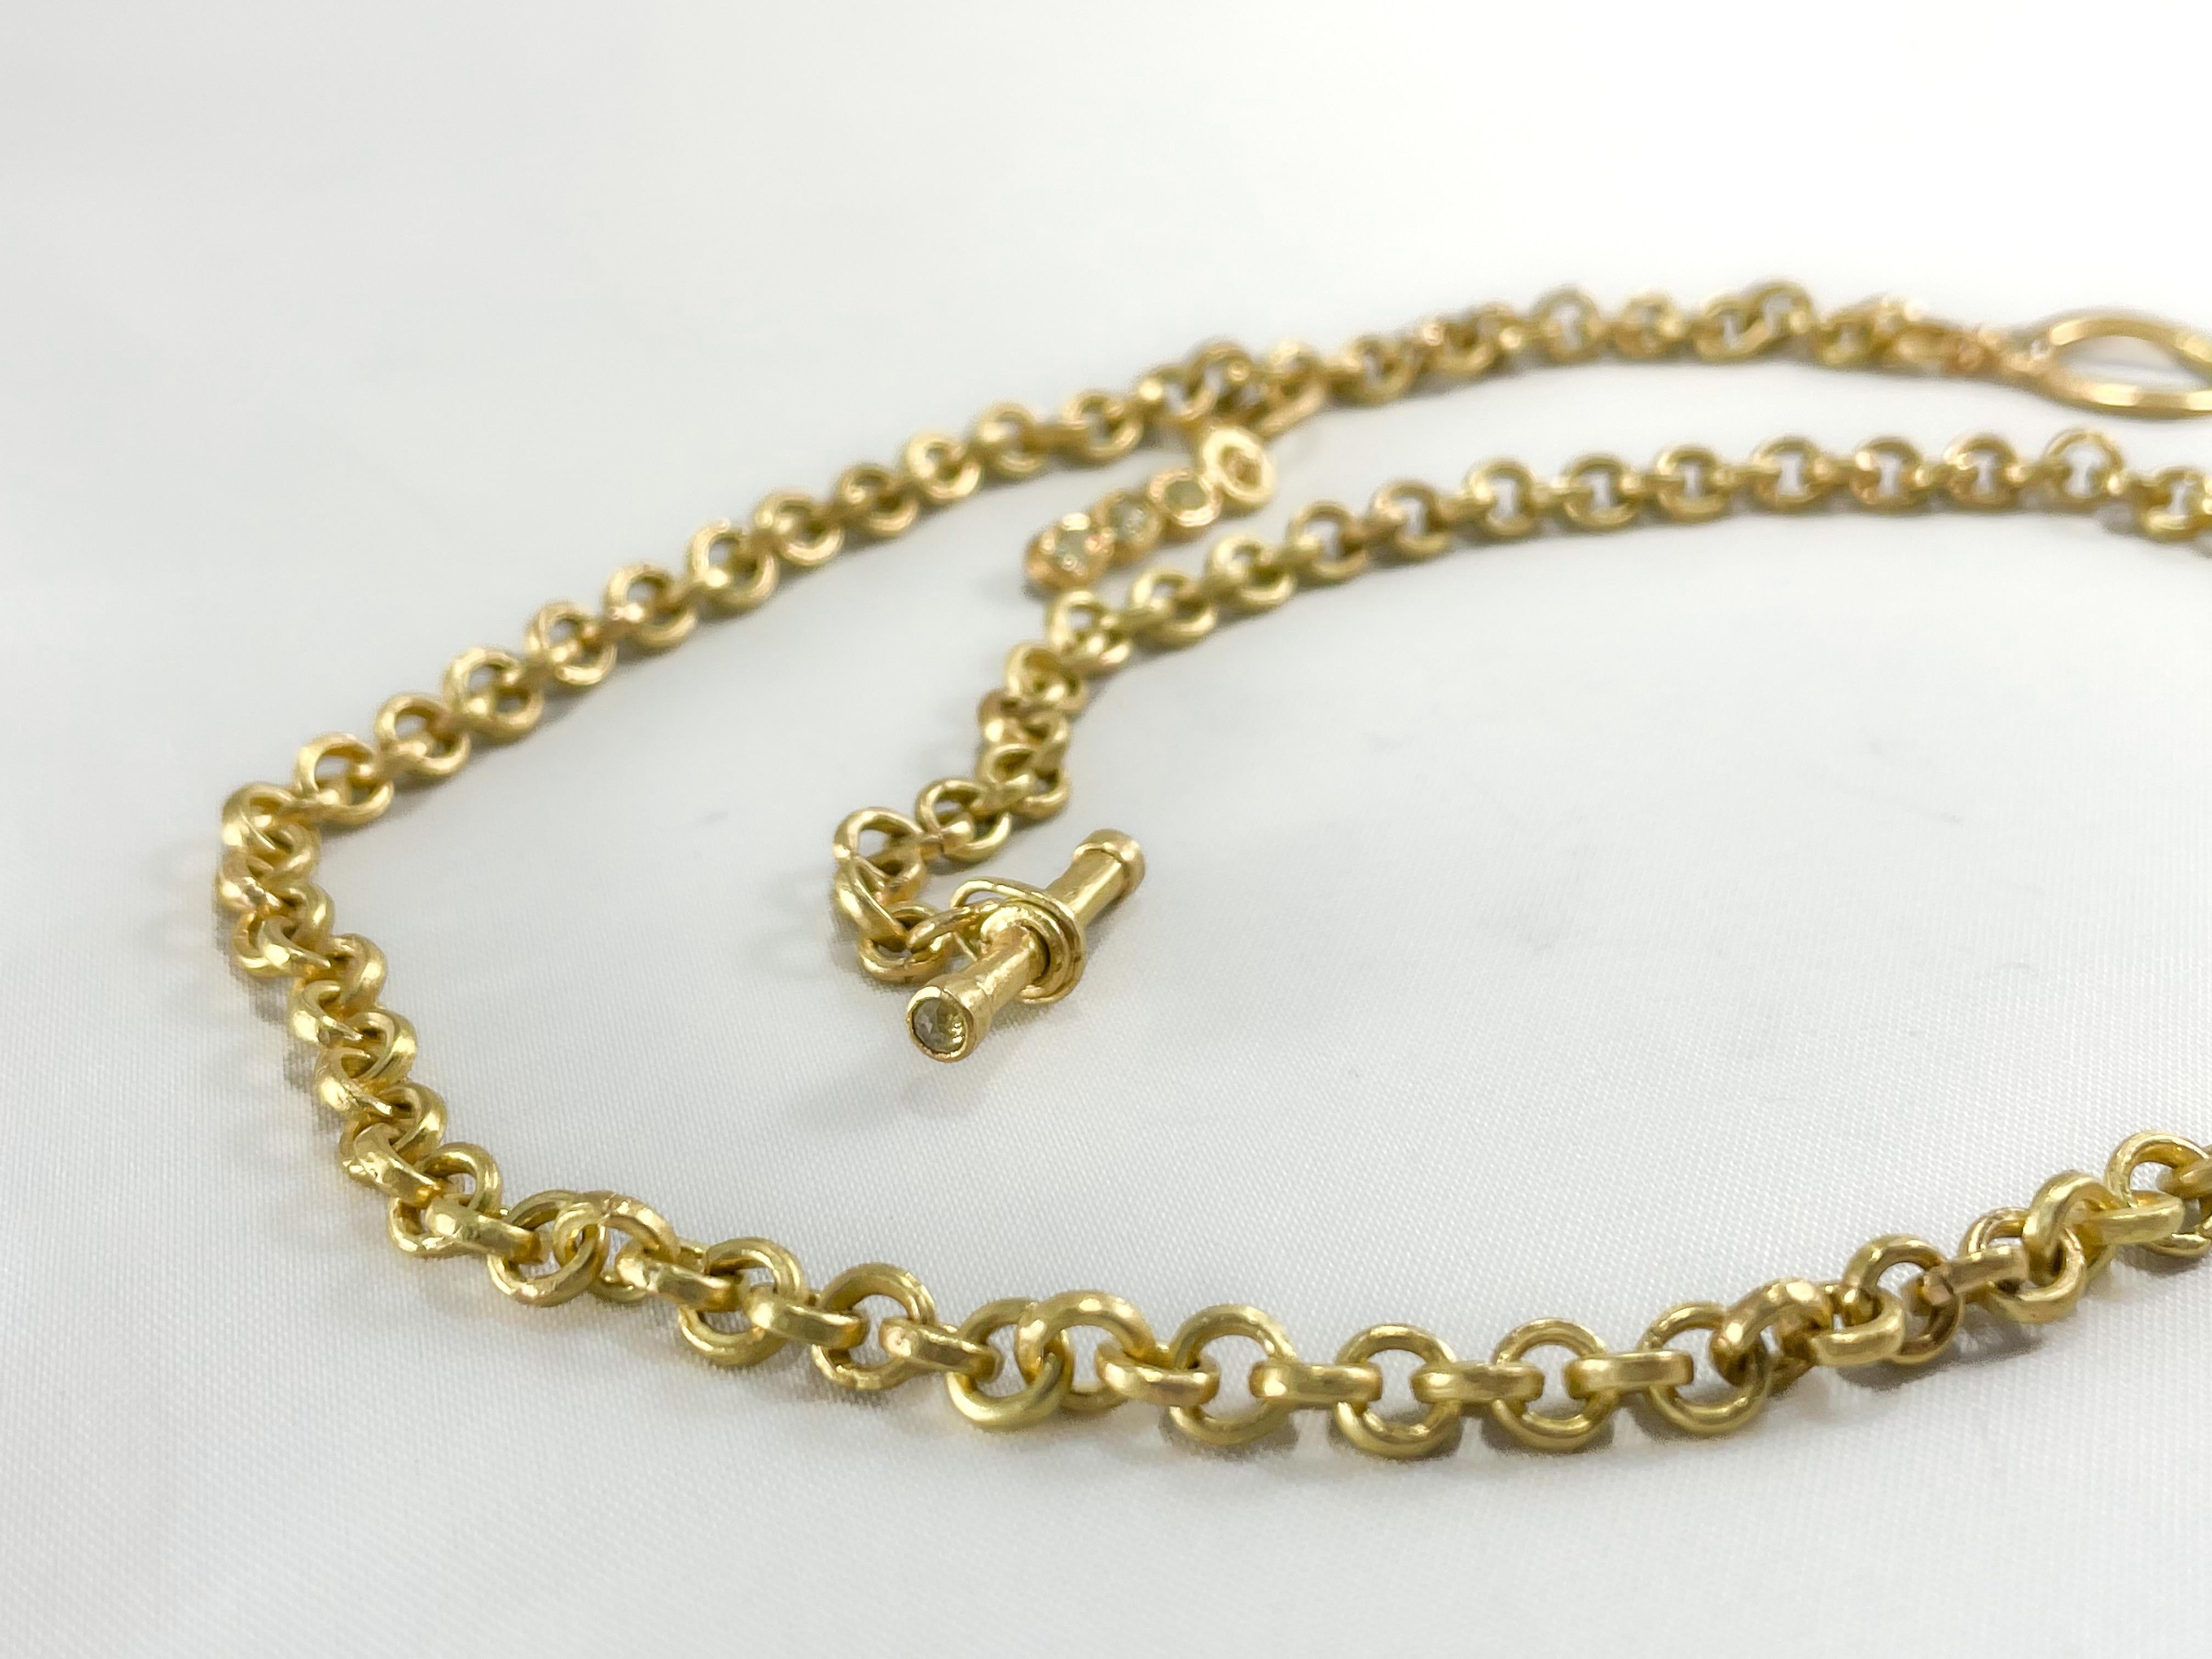 17mm Cream Pearl on 18K Gold Chain Necklace Diamond Enhancer and Toggle Clasp For Sale 6